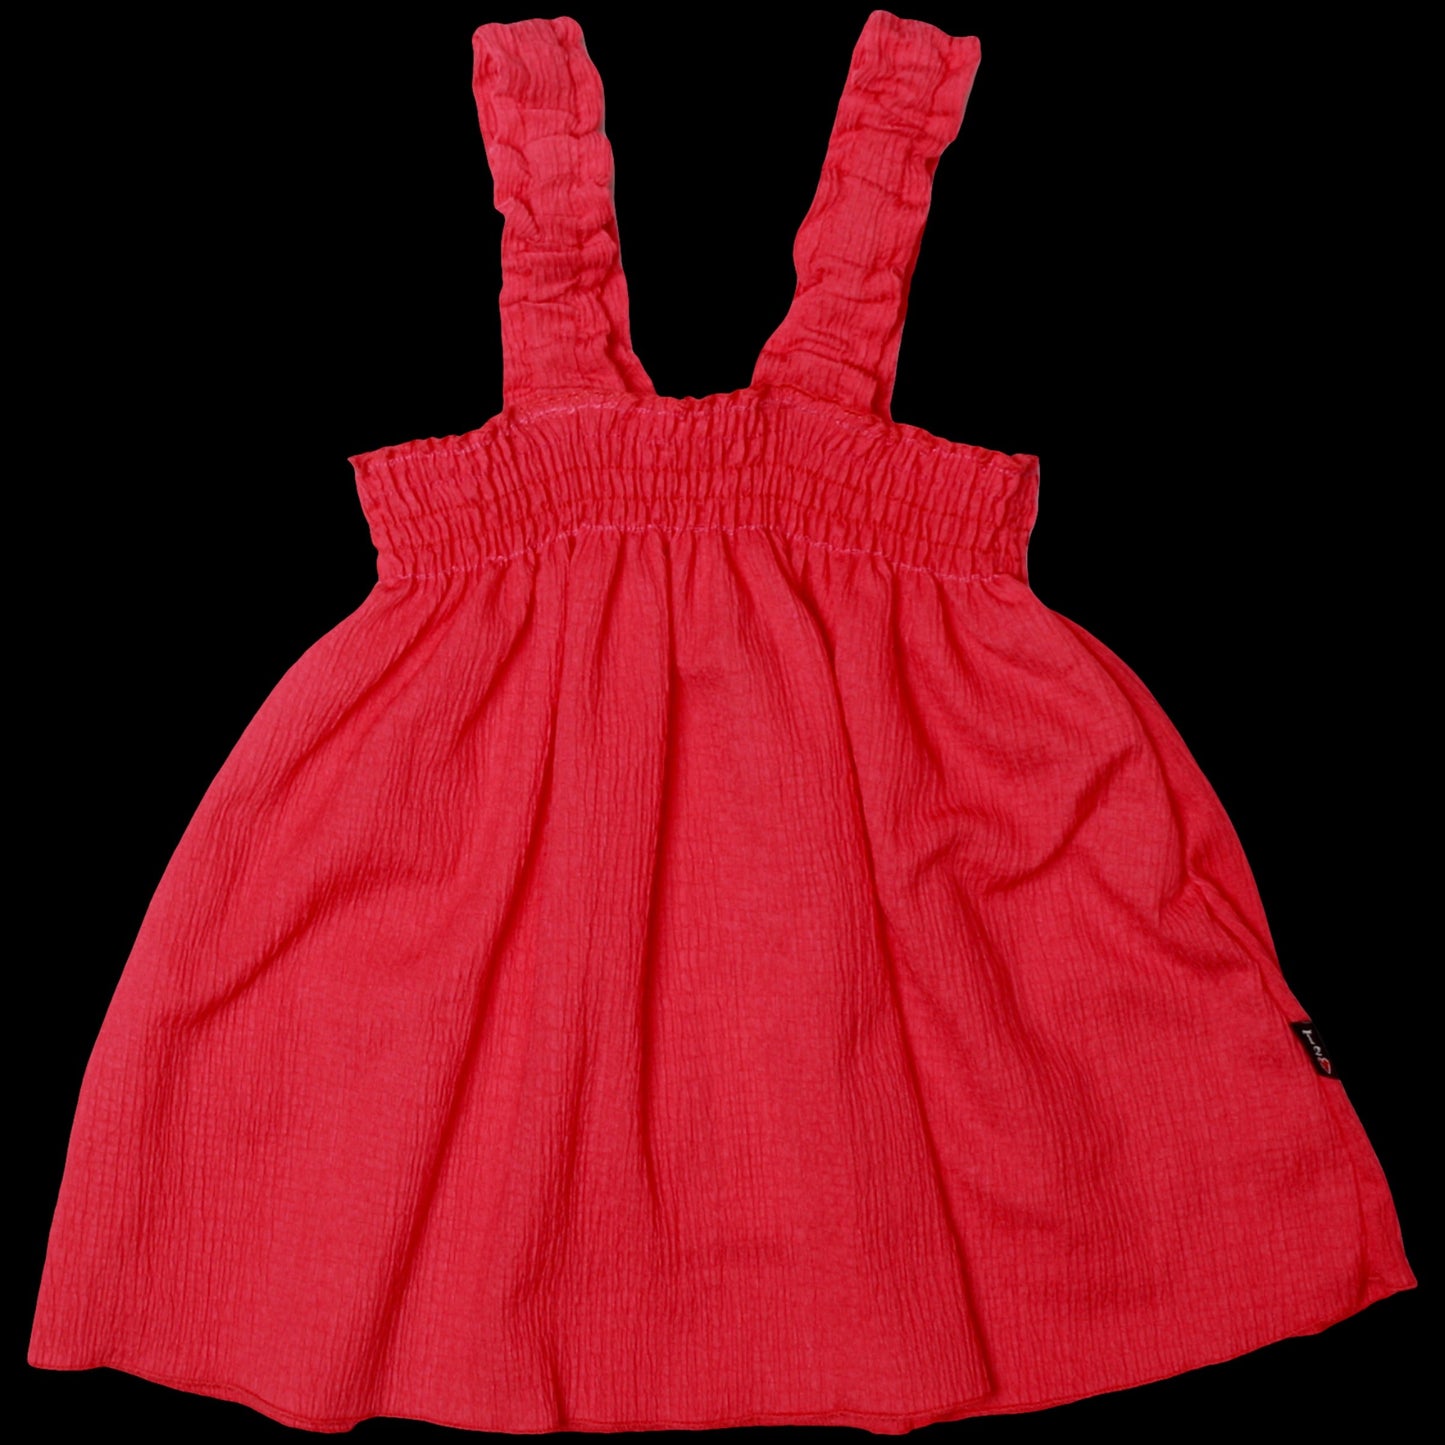 Thick-Strap Smocked Top